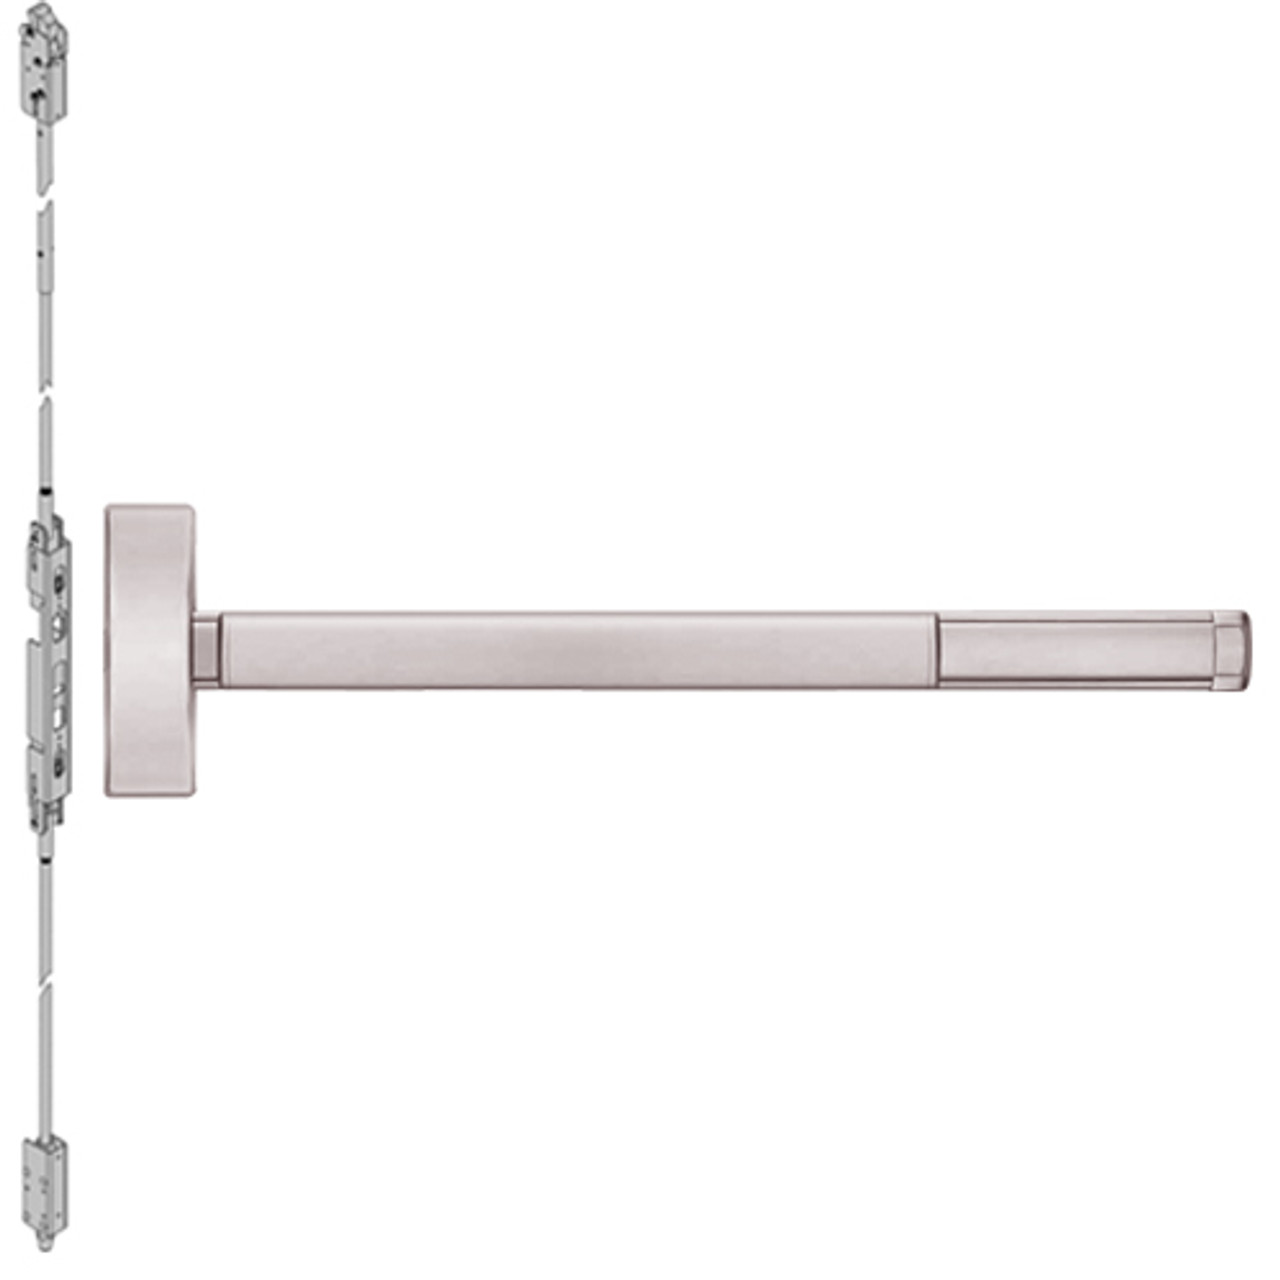 ELRFL2802LBR-628-36 PHI 2800 Series Fire Rated Concealed Vertical Rod Exit Device with Electric Latch Retraction Prepped for Dummy Trim in Satin Aluminum Finish